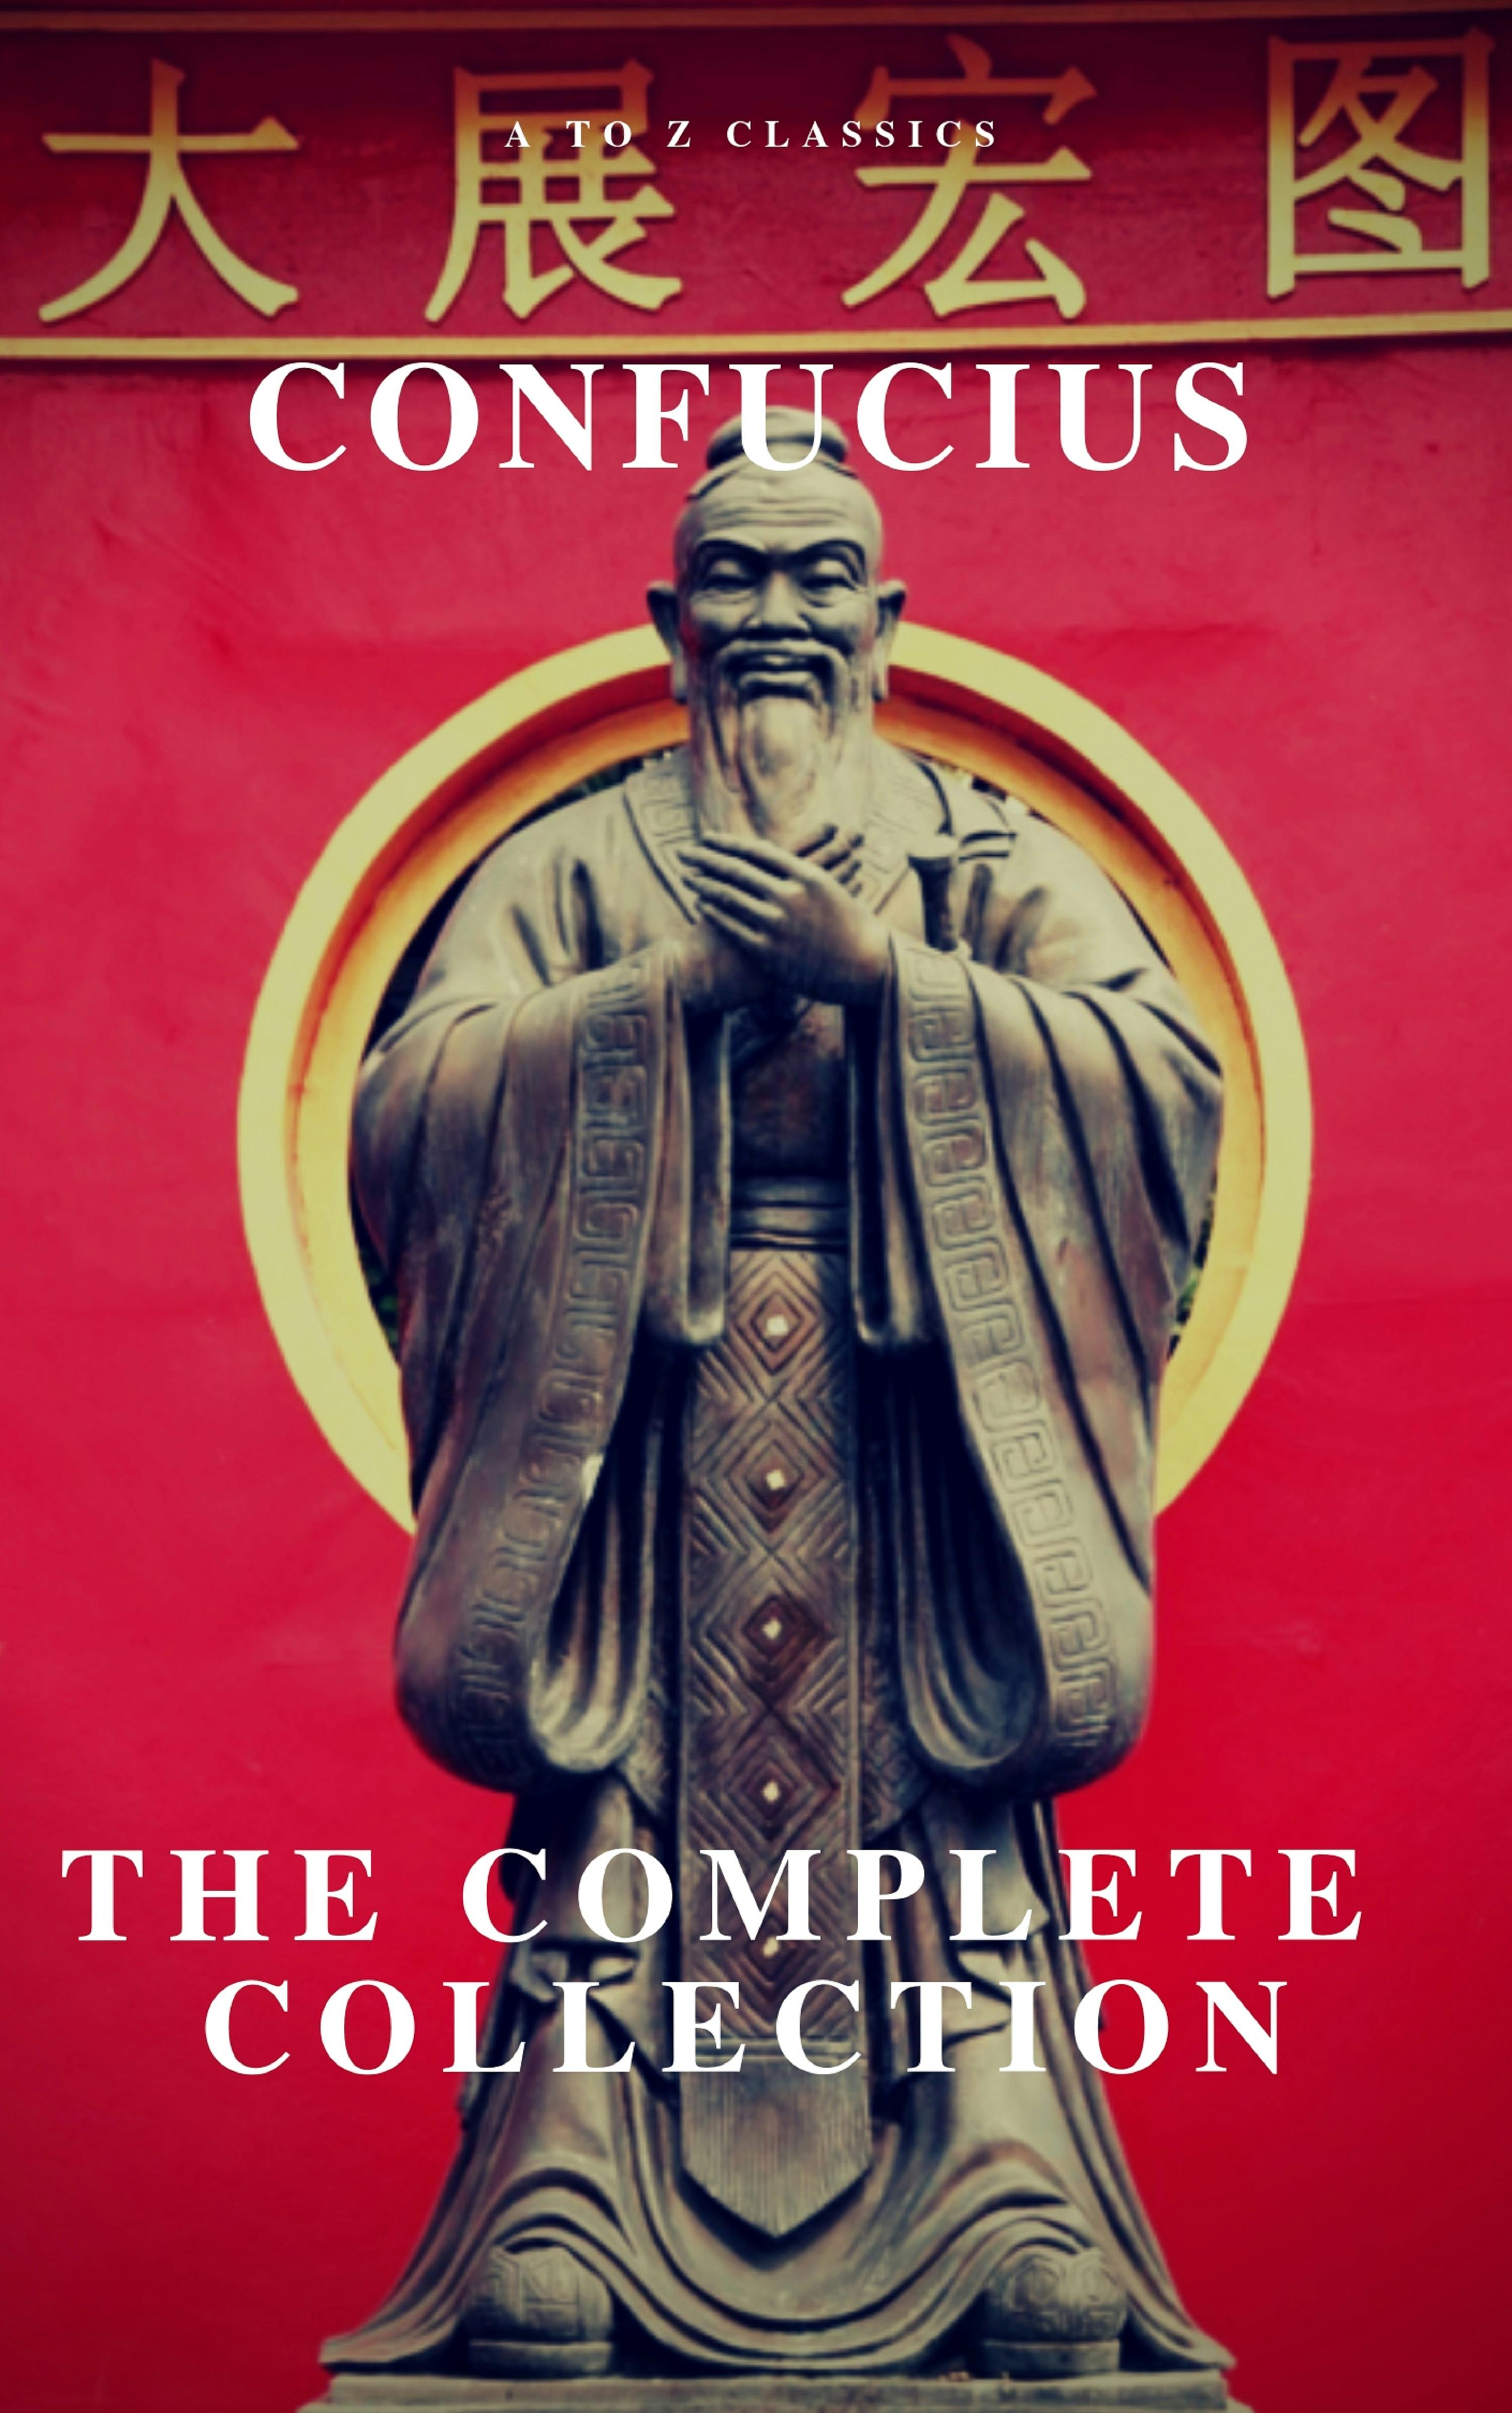 The Complete Confucius: The Analects, The Doctrine Of The Mean, and The Great Learning - Confucius, A to Z Classics